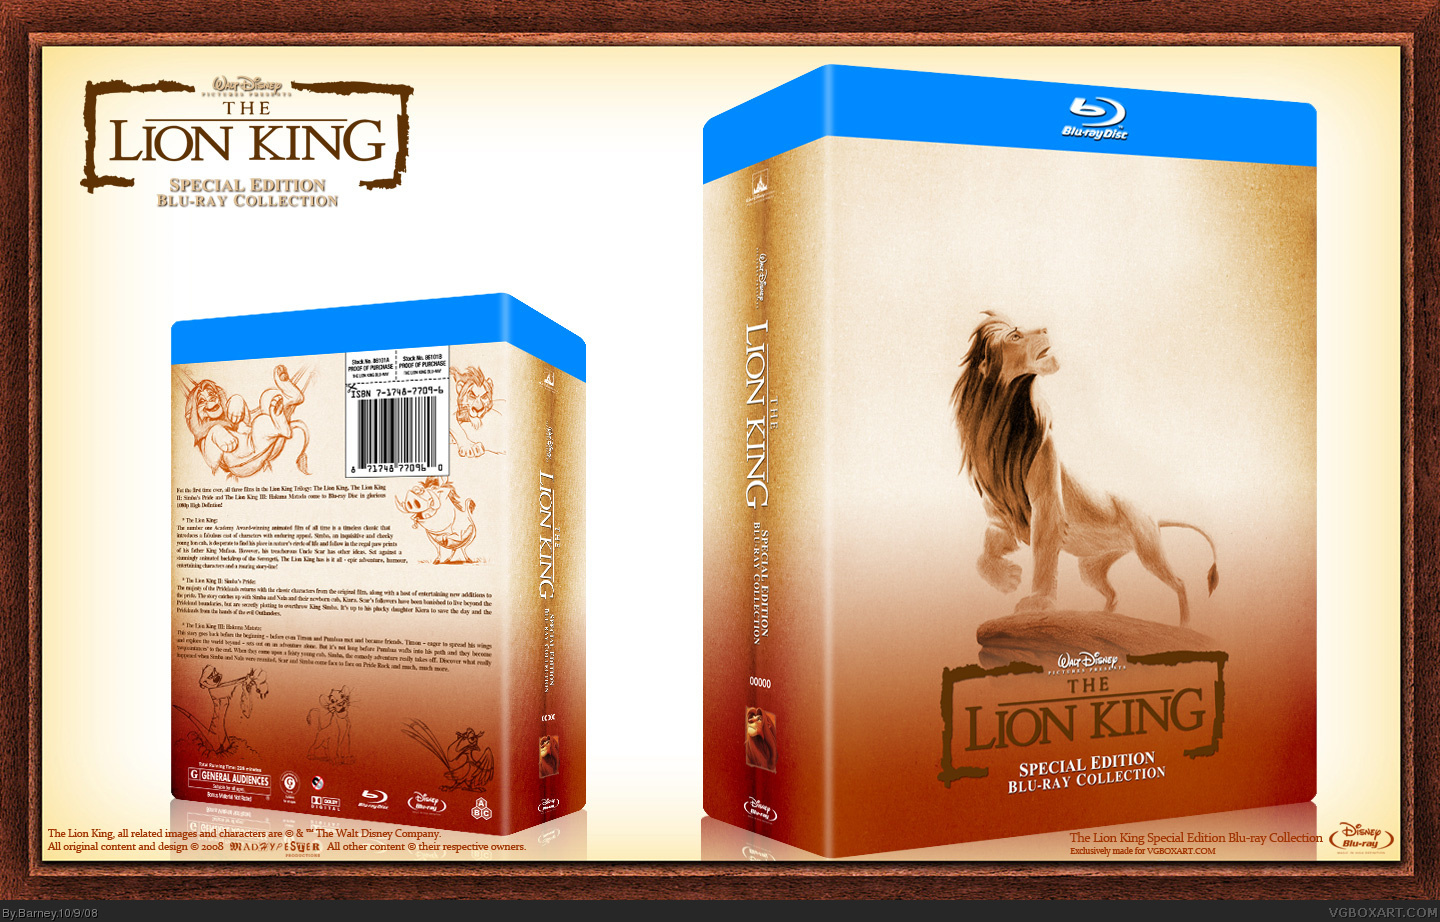 The Lion King Blu-ray Collection box cover